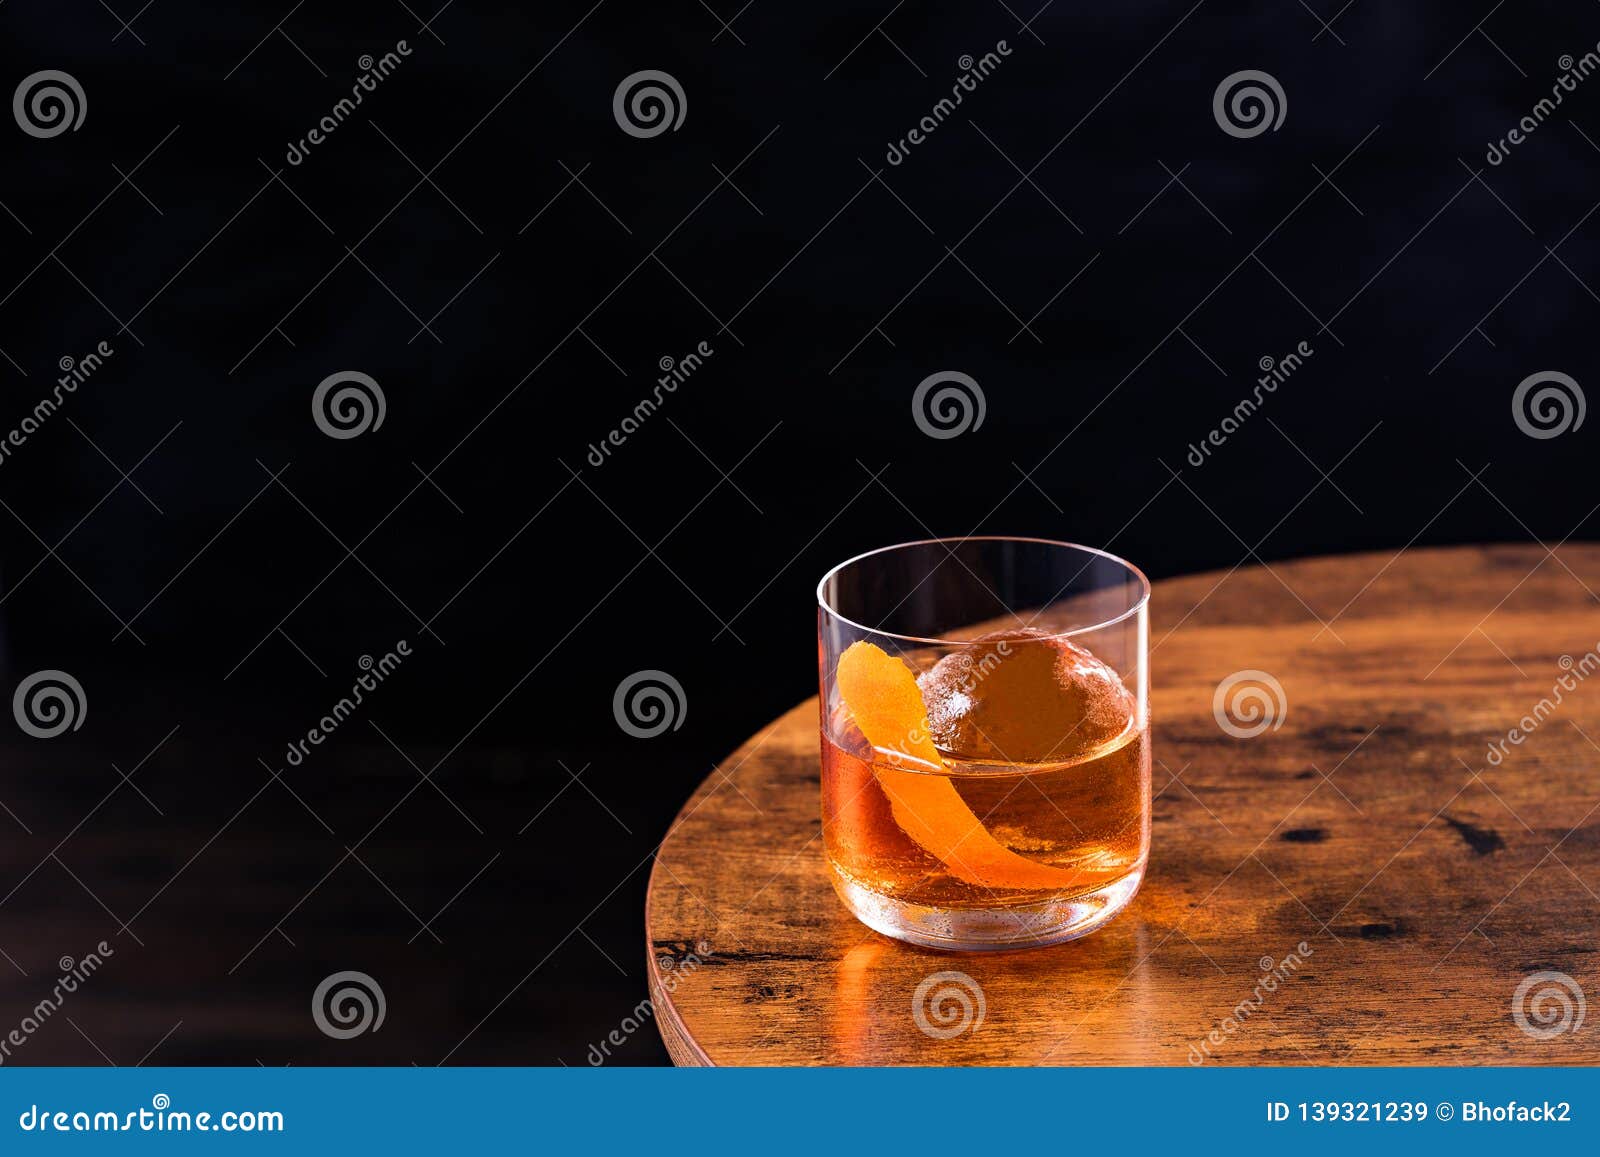 refreshing bourbon old fashioned cocktail